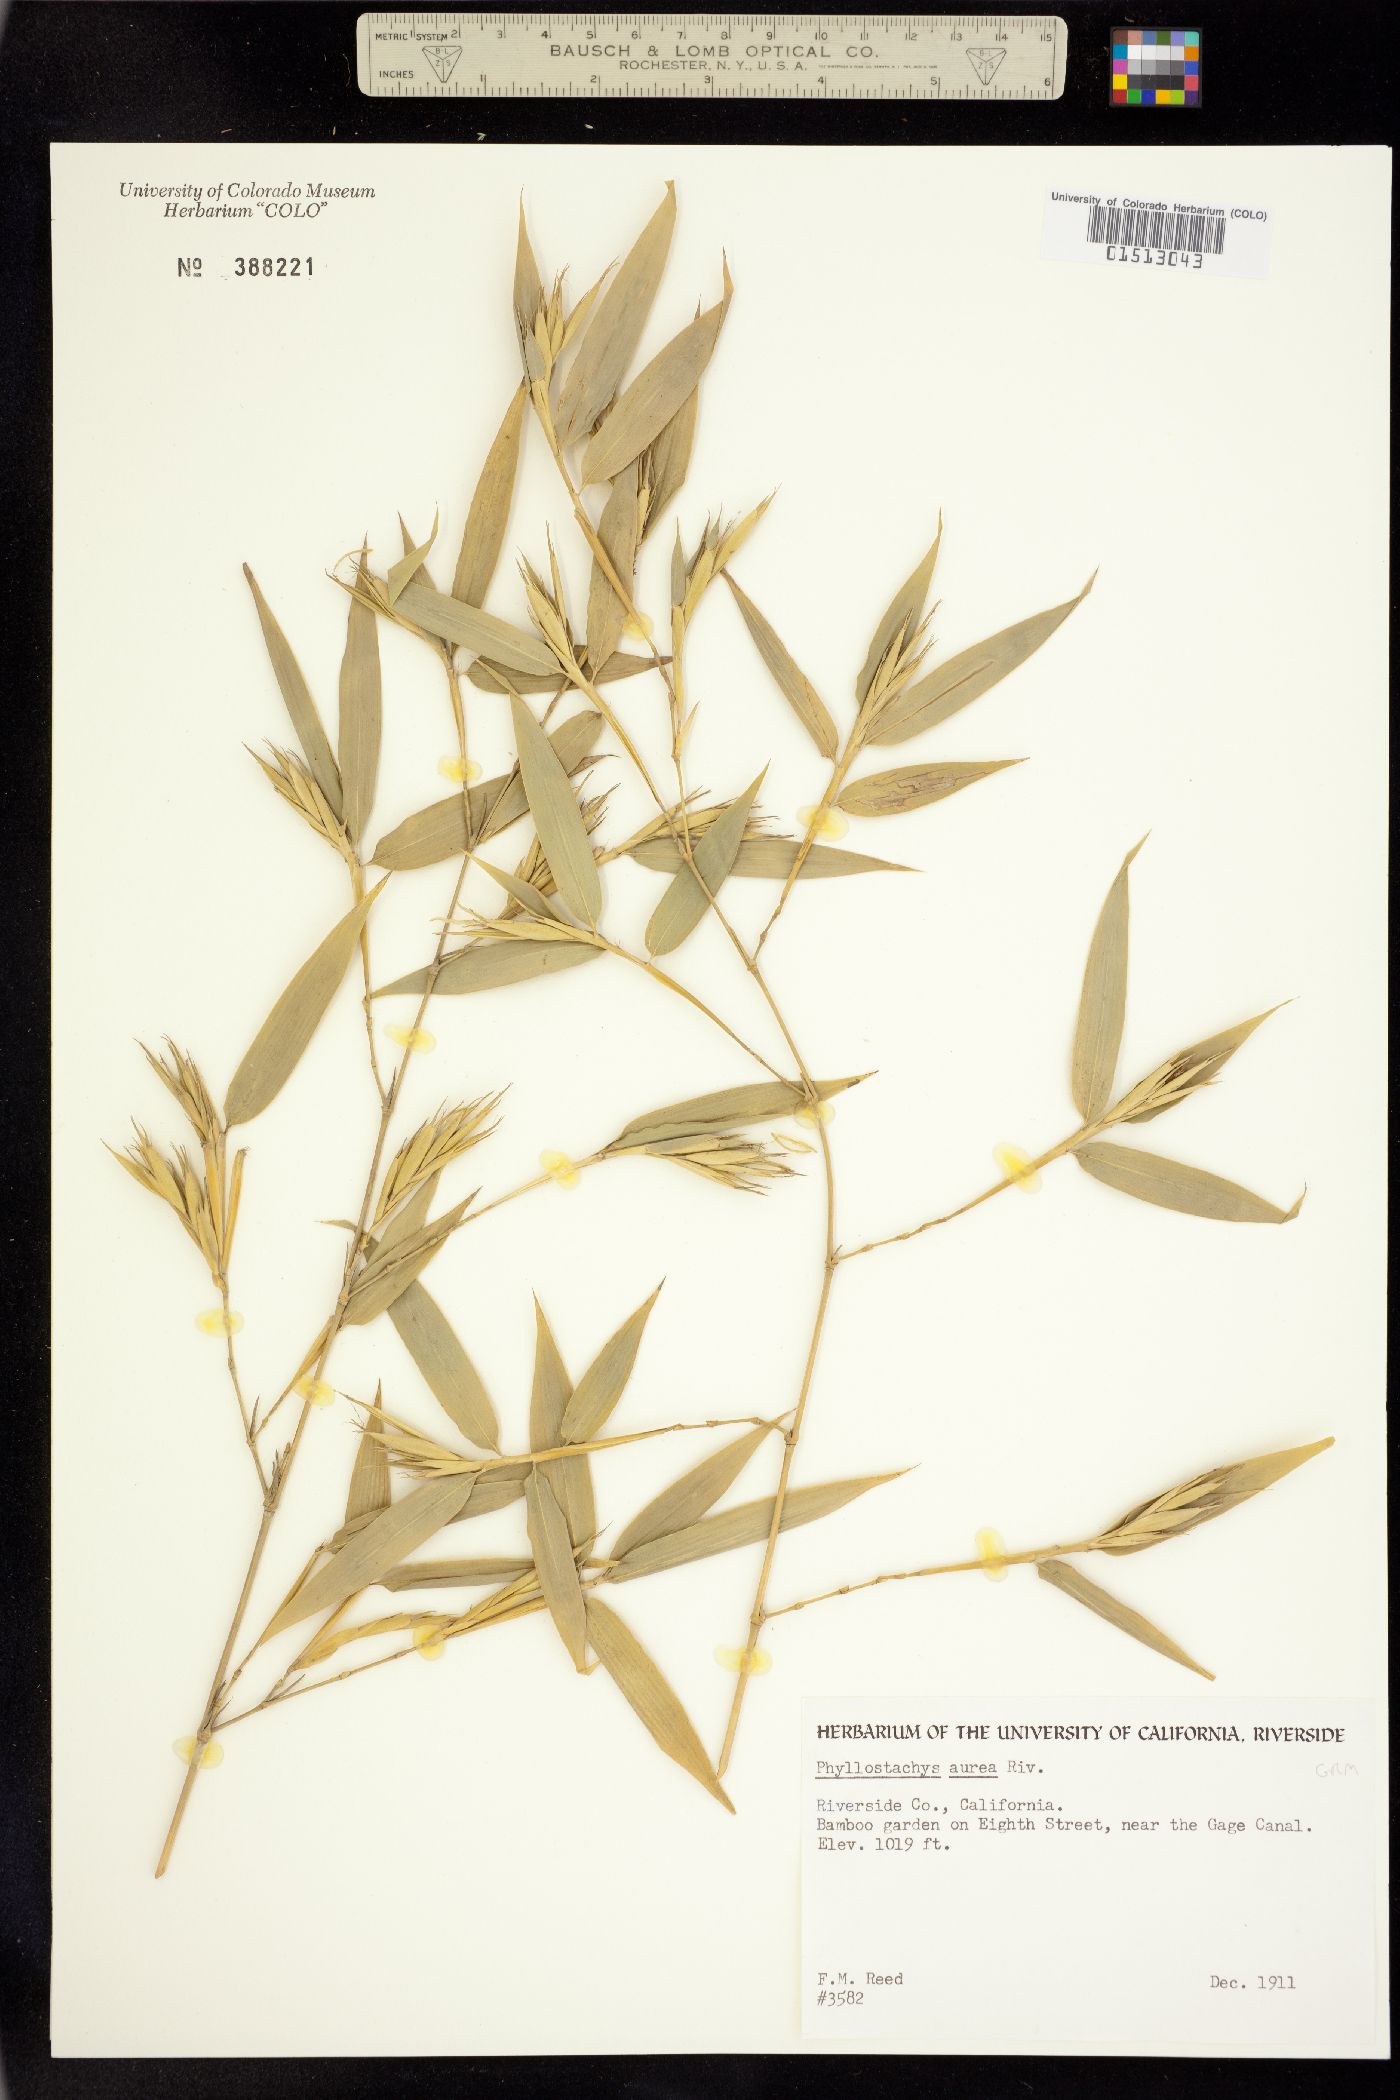 Phyllostachys image